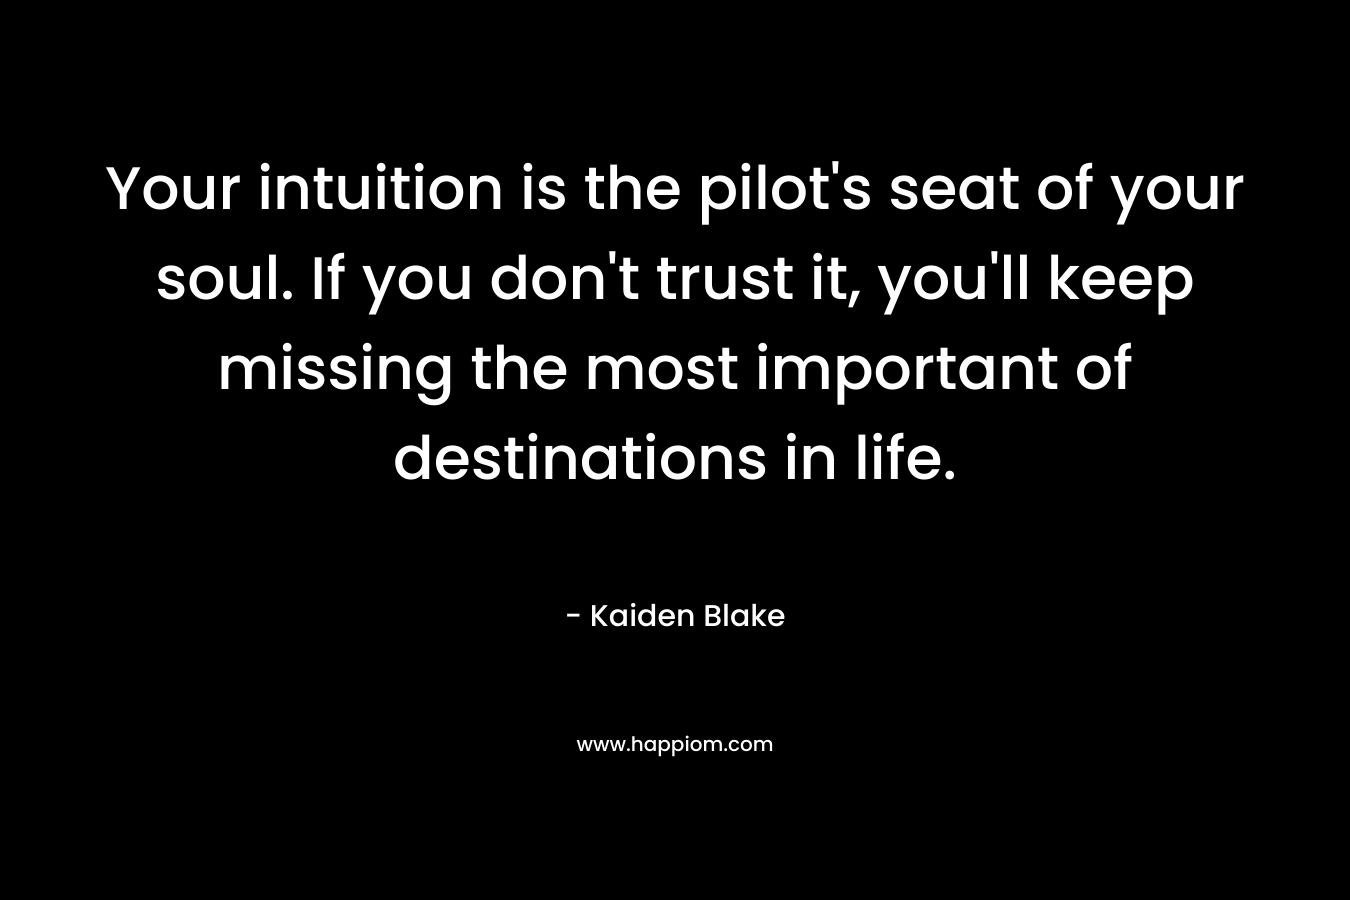 Your intuition is the pilot’s seat of your soul. If you don’t trust it, you’ll keep missing the most important of destinations in life. – Kaiden Blake